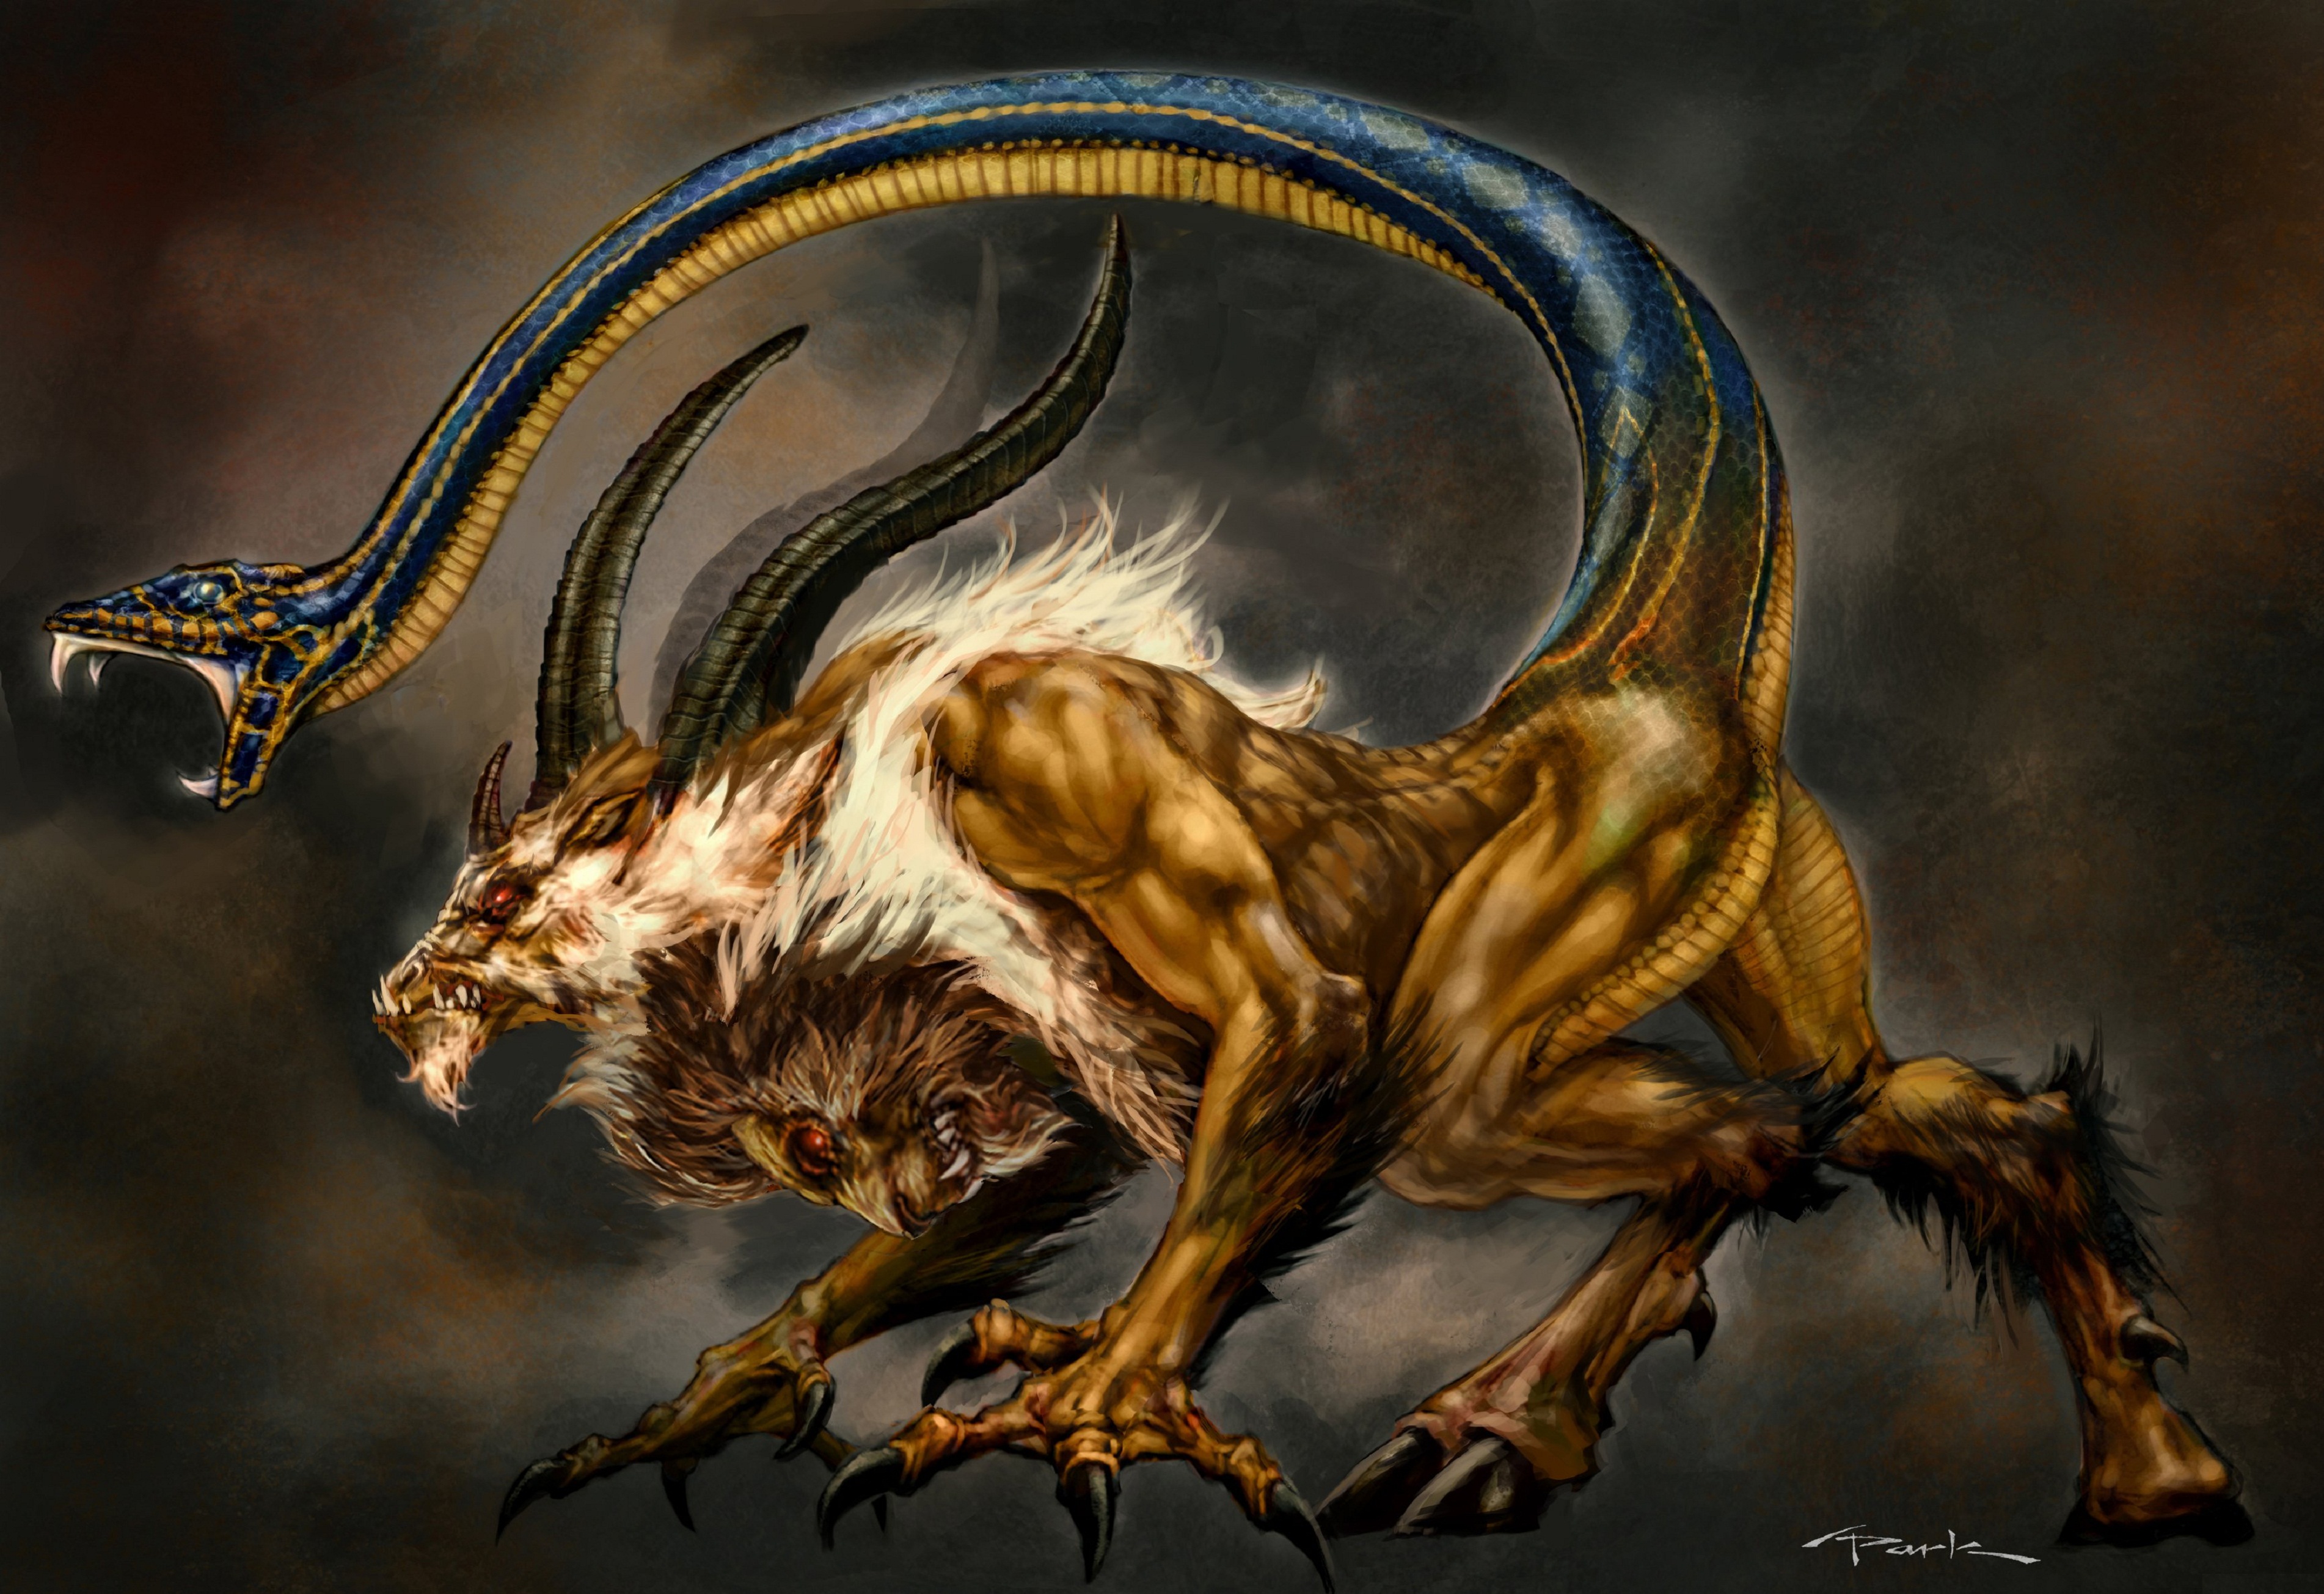 Eight creepiest mythical creatures from around the world - Gengo